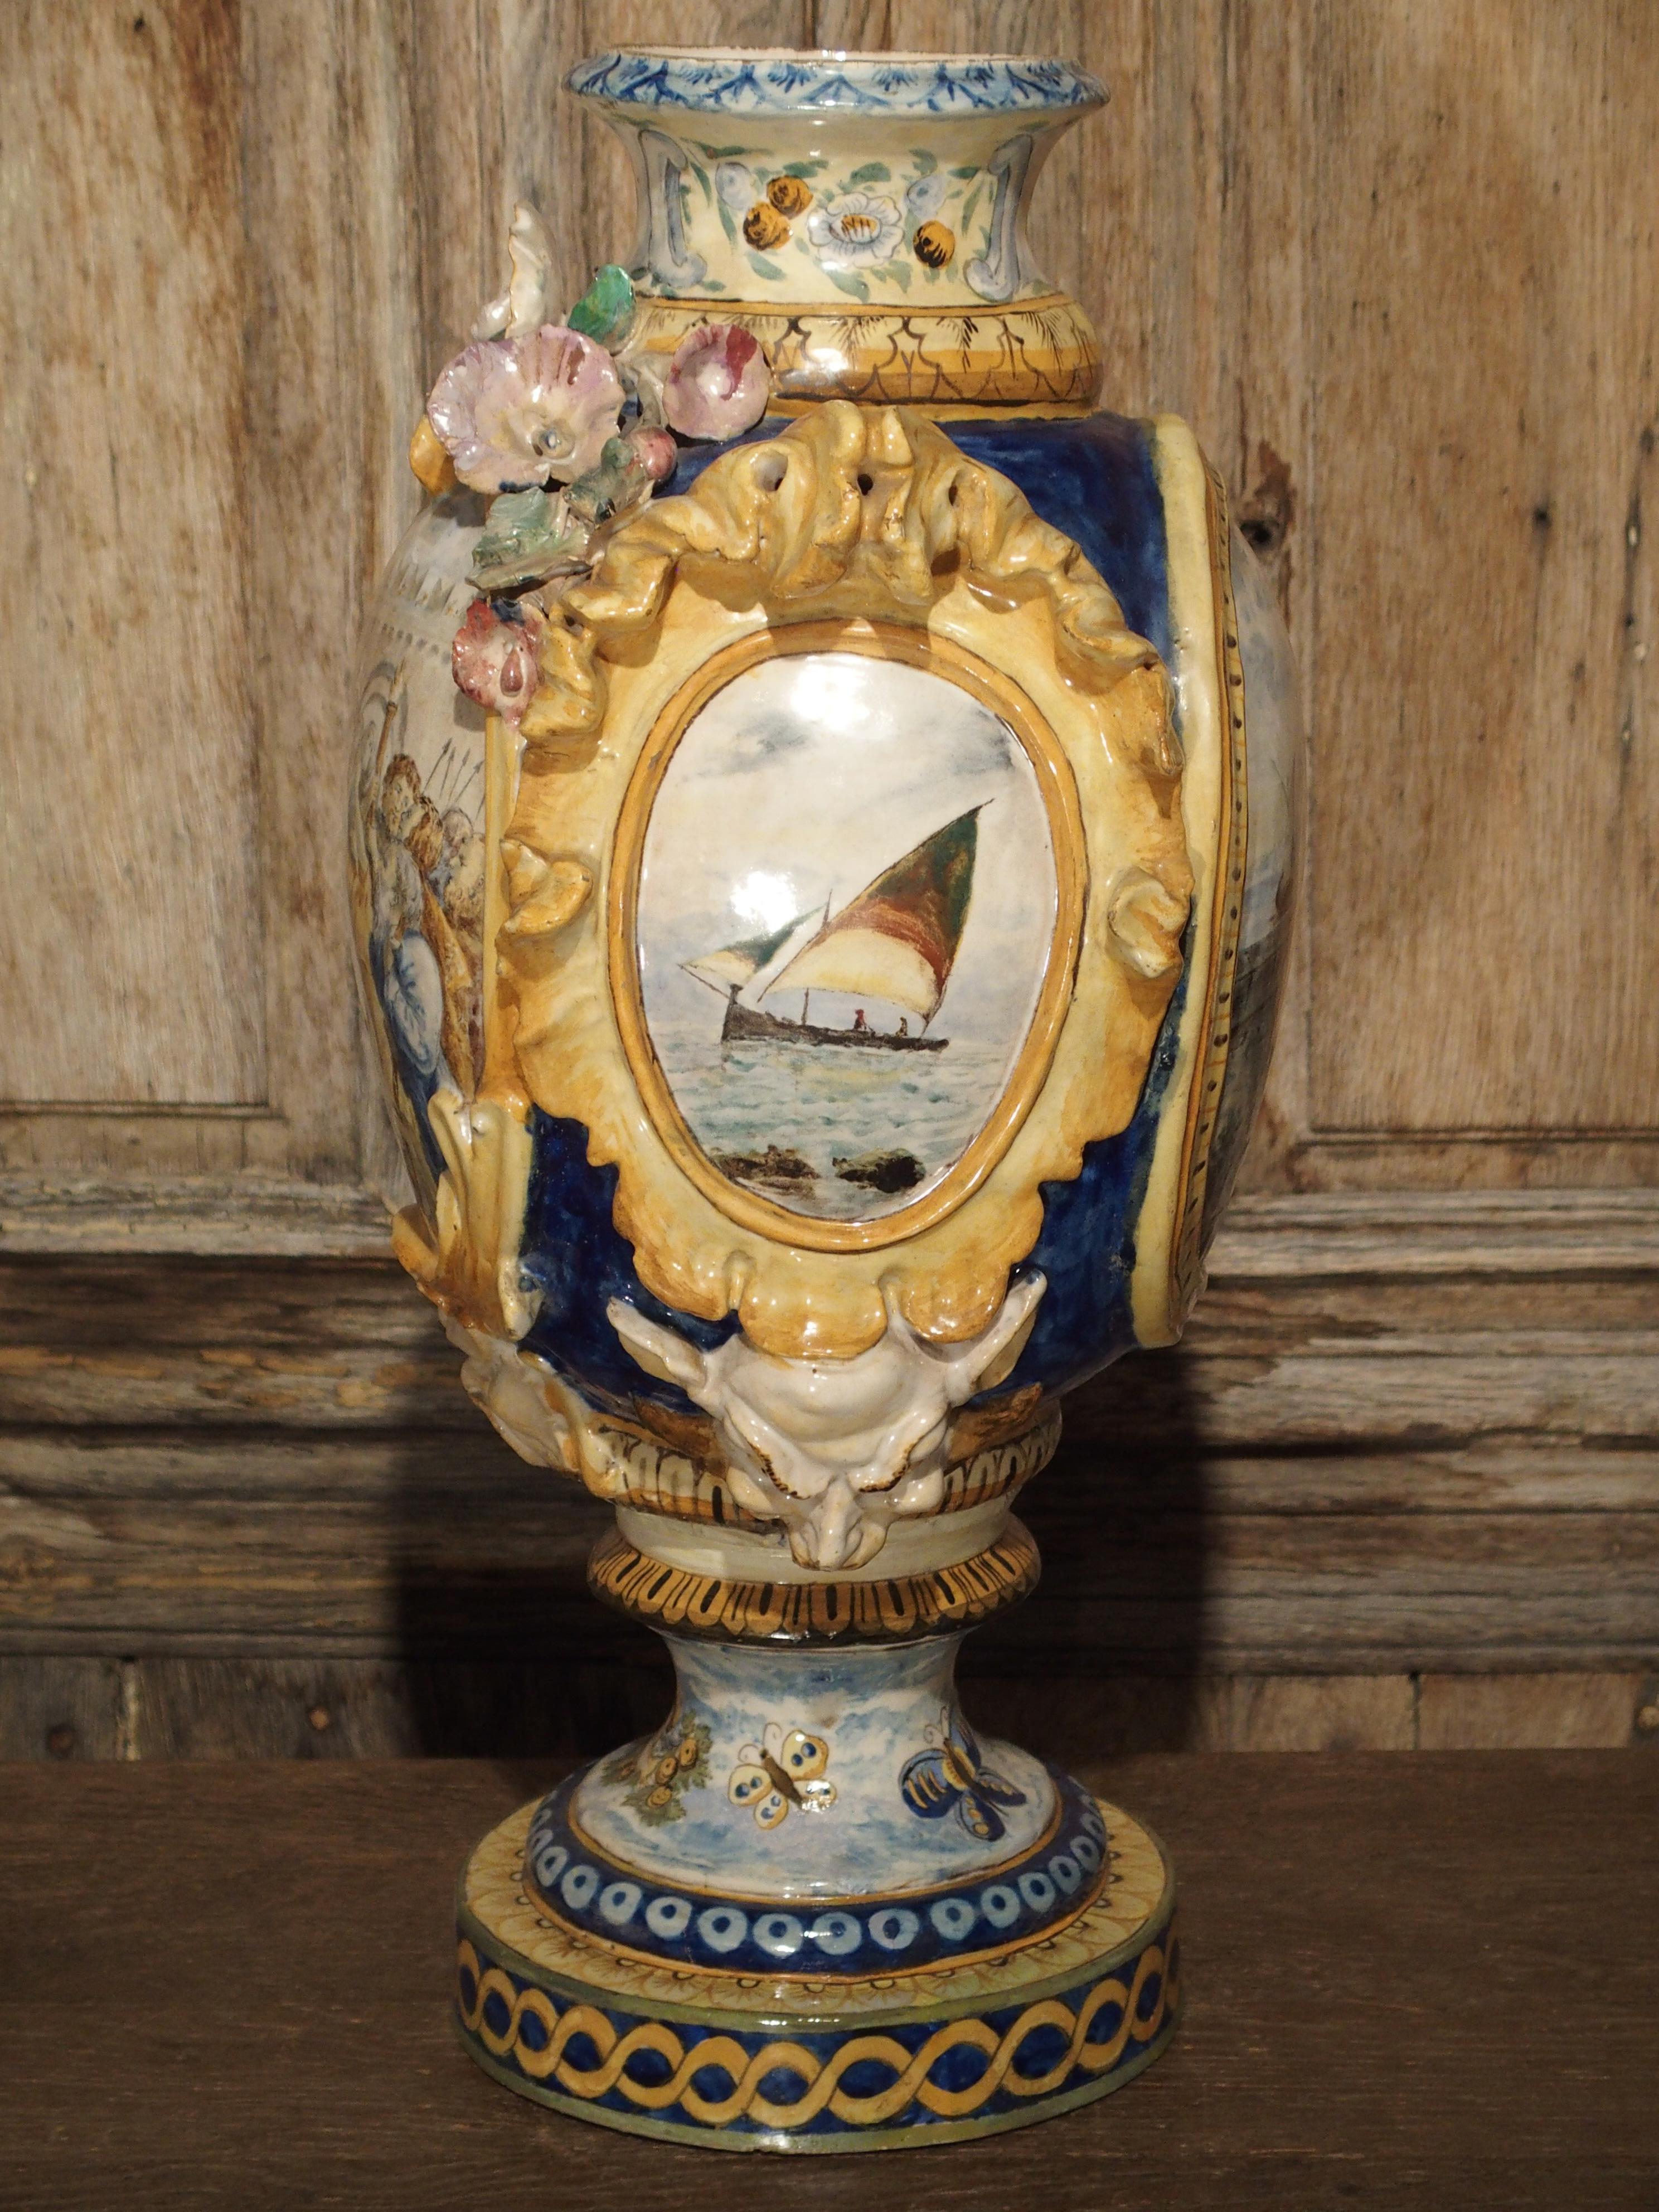 From Italy, this bright Majolica vase has colors of yellow, blue, gold, white and more. Each side of the vase has hand painted scenes with motifs of butterflies, cherubs, flowers, animals, and more. There are gros relief forms of shells, flowers,